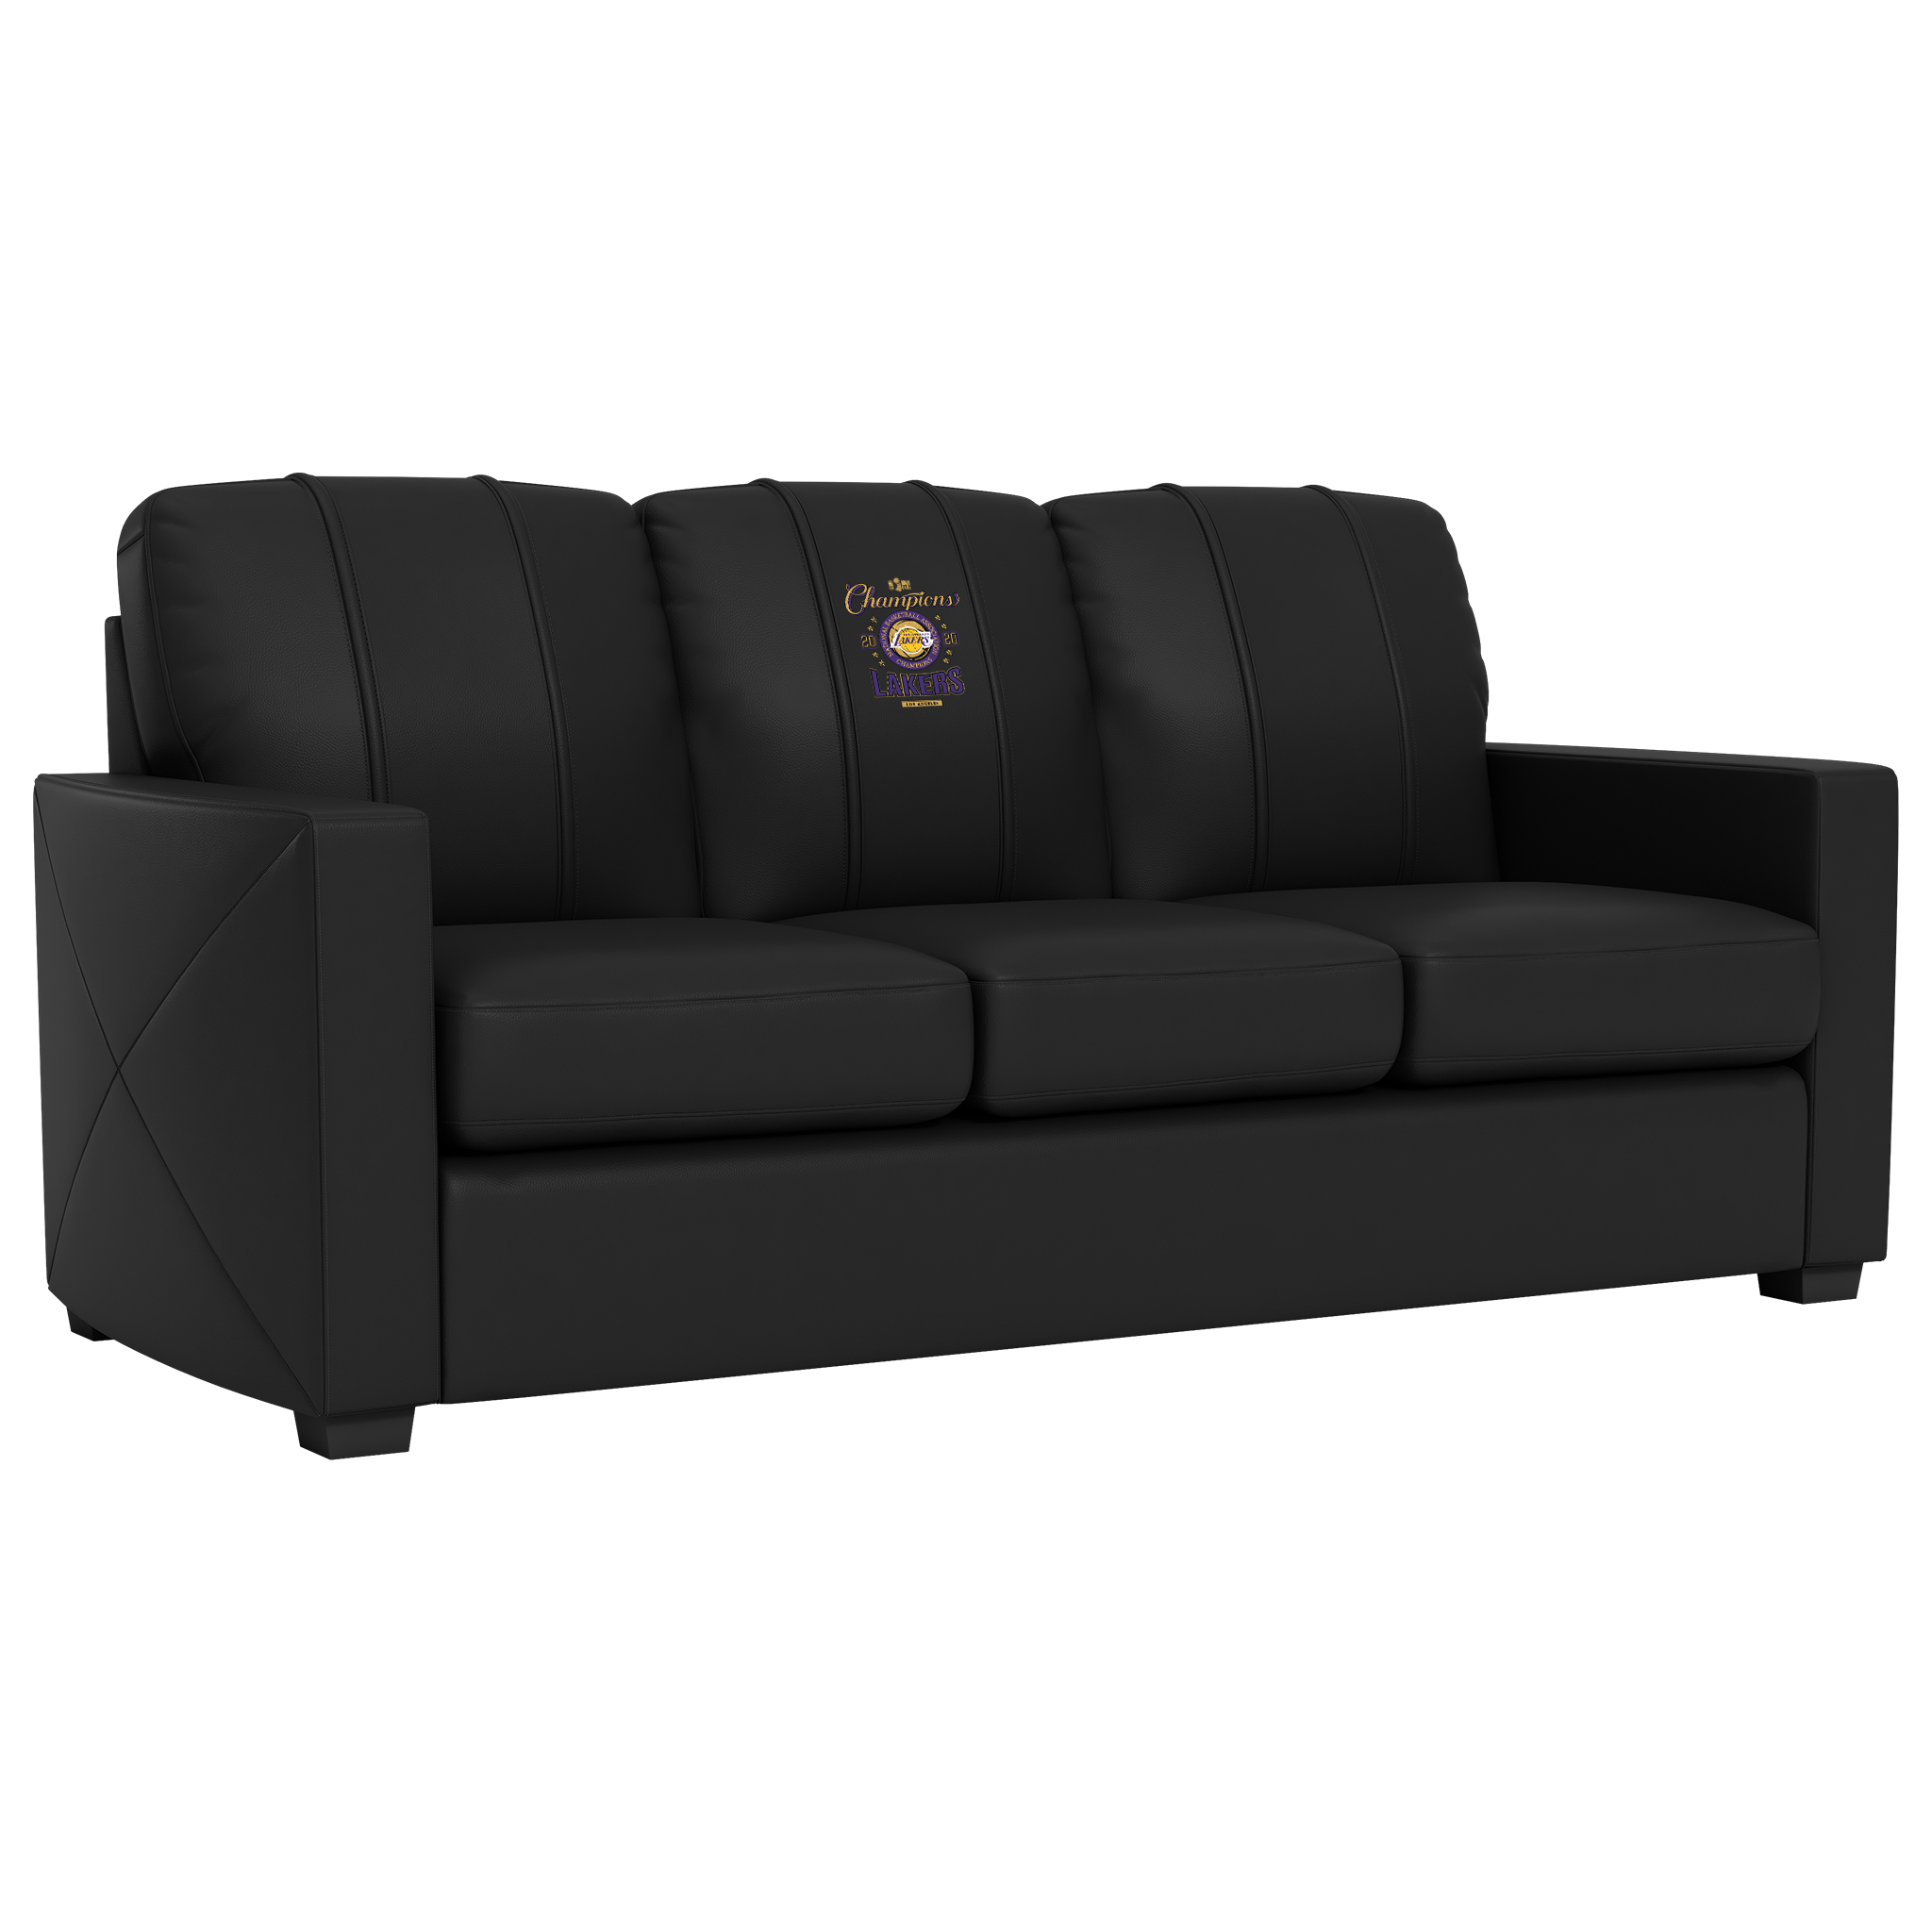 Los Angeles Lakers Silver Sofa with Los Angeles Lakers 2020 Champions Logo